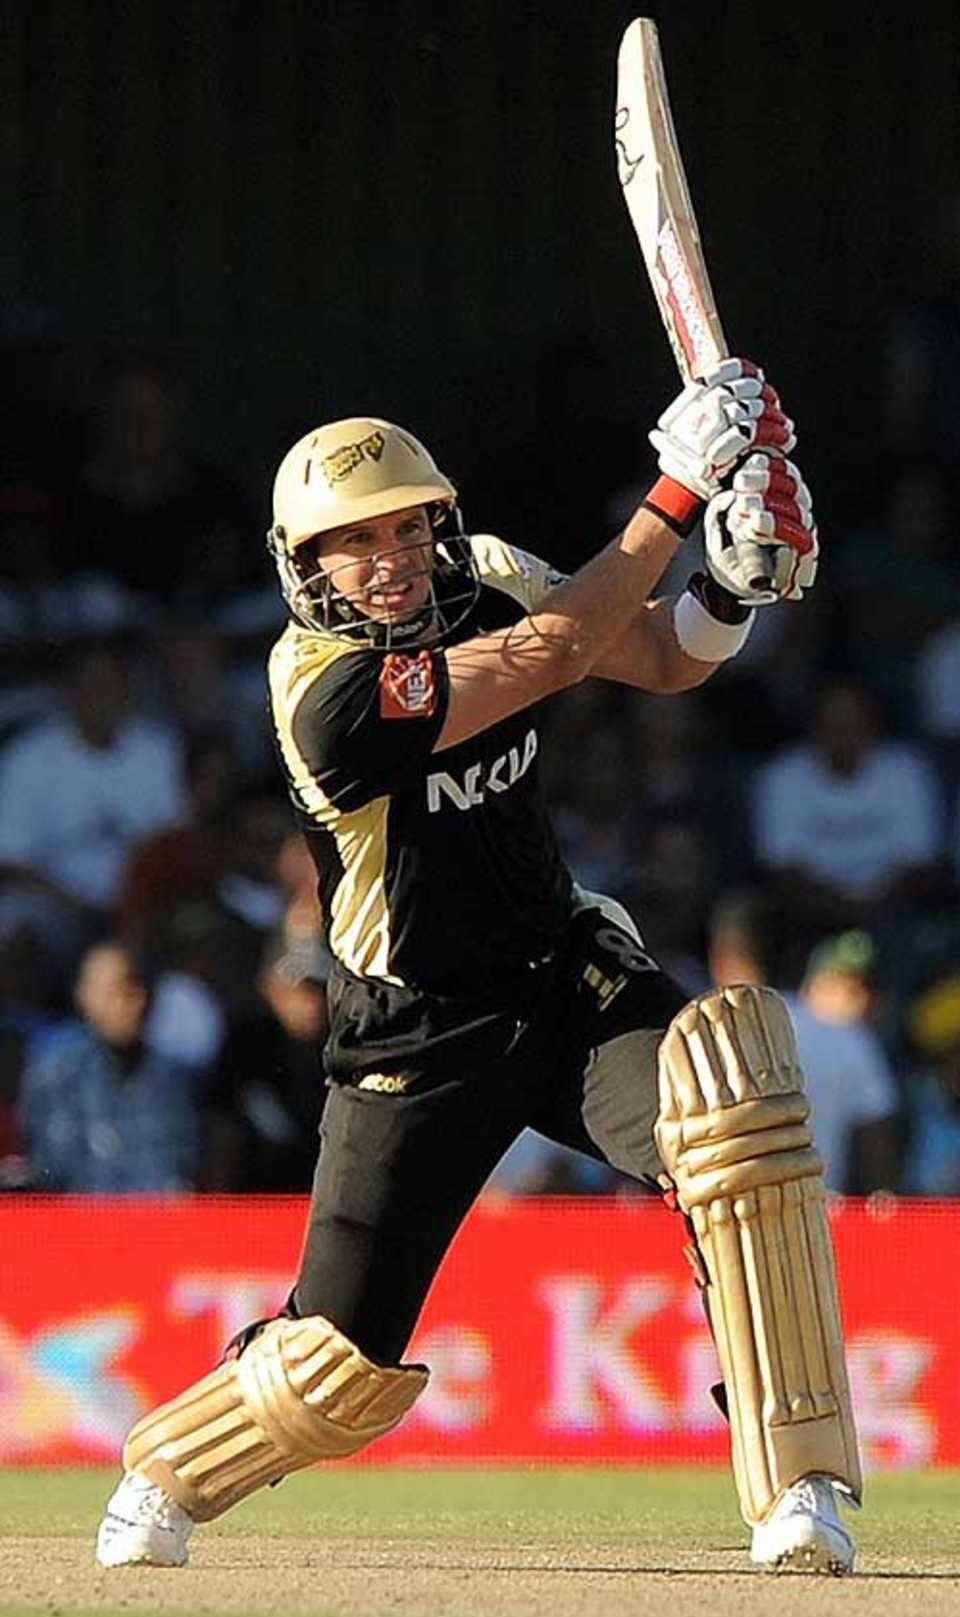 Brad Hodge played well but couldn't seal victory